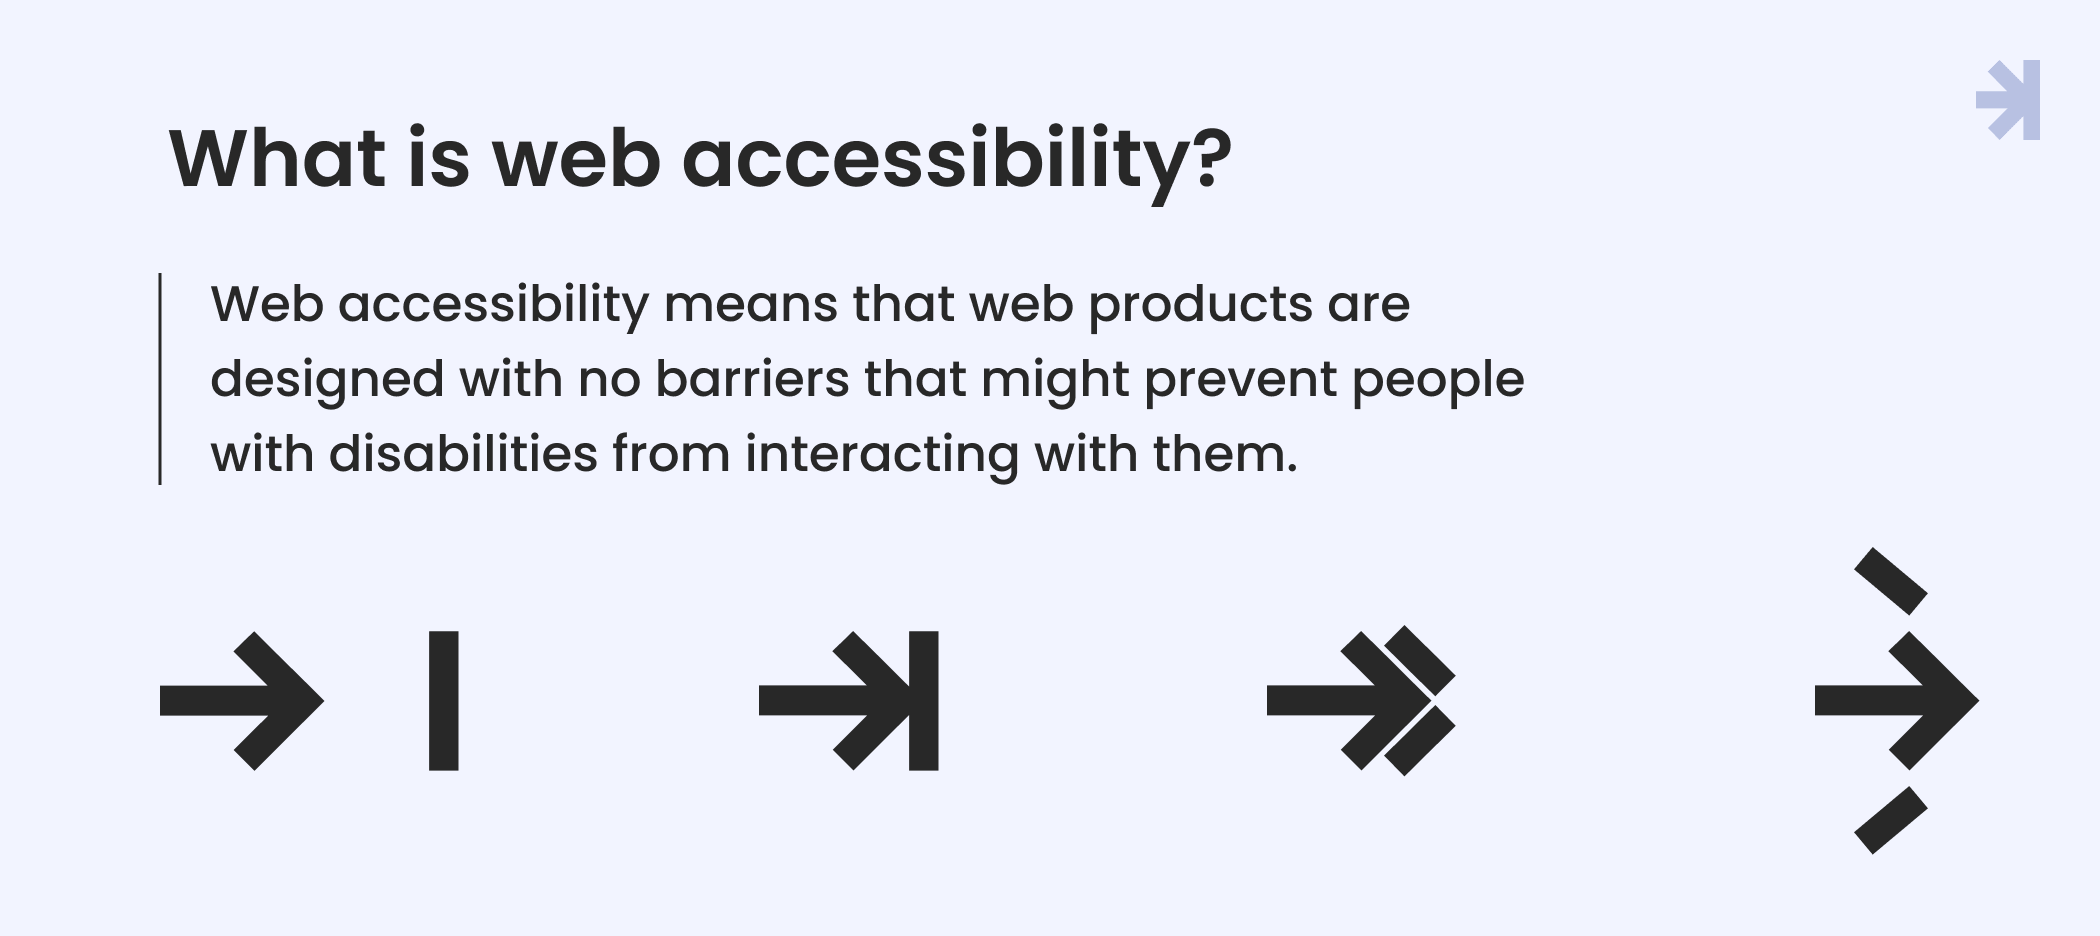 Understanding web accessibility